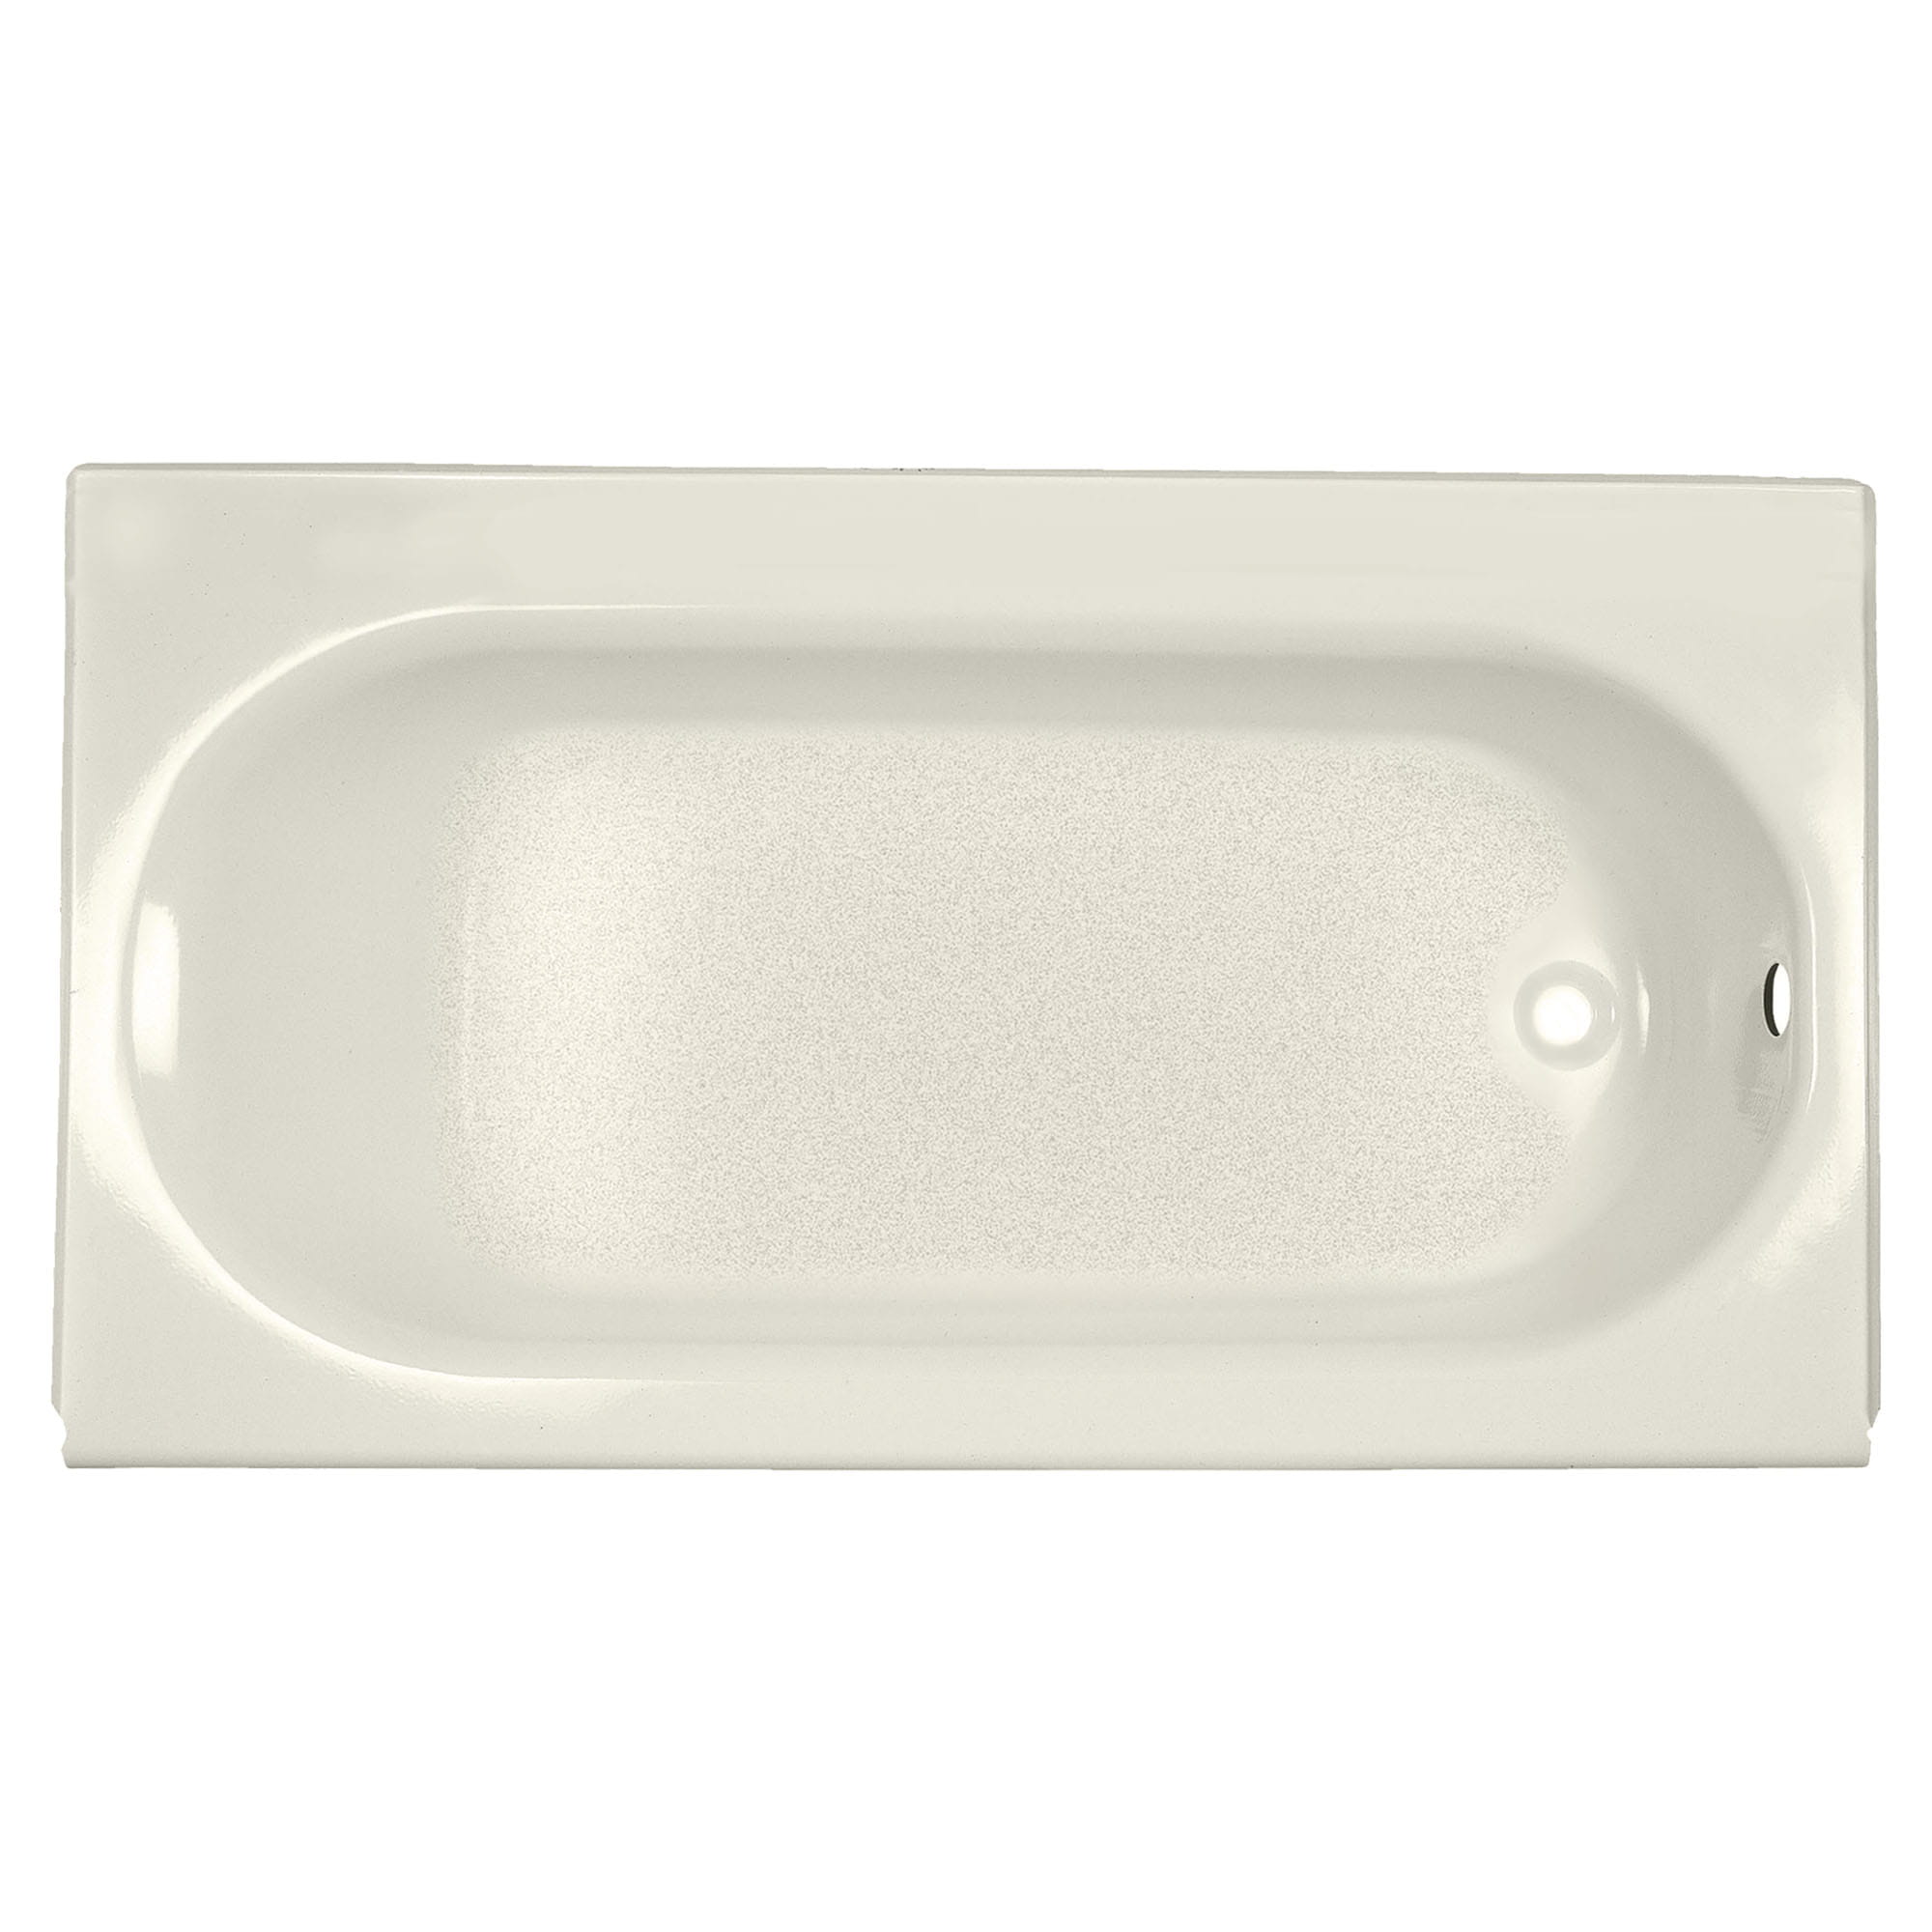 Princeton Americast 60 x 34 Inch Integral Apron Bathtub Right Hand Outlet with Luxury Ledge LINEN